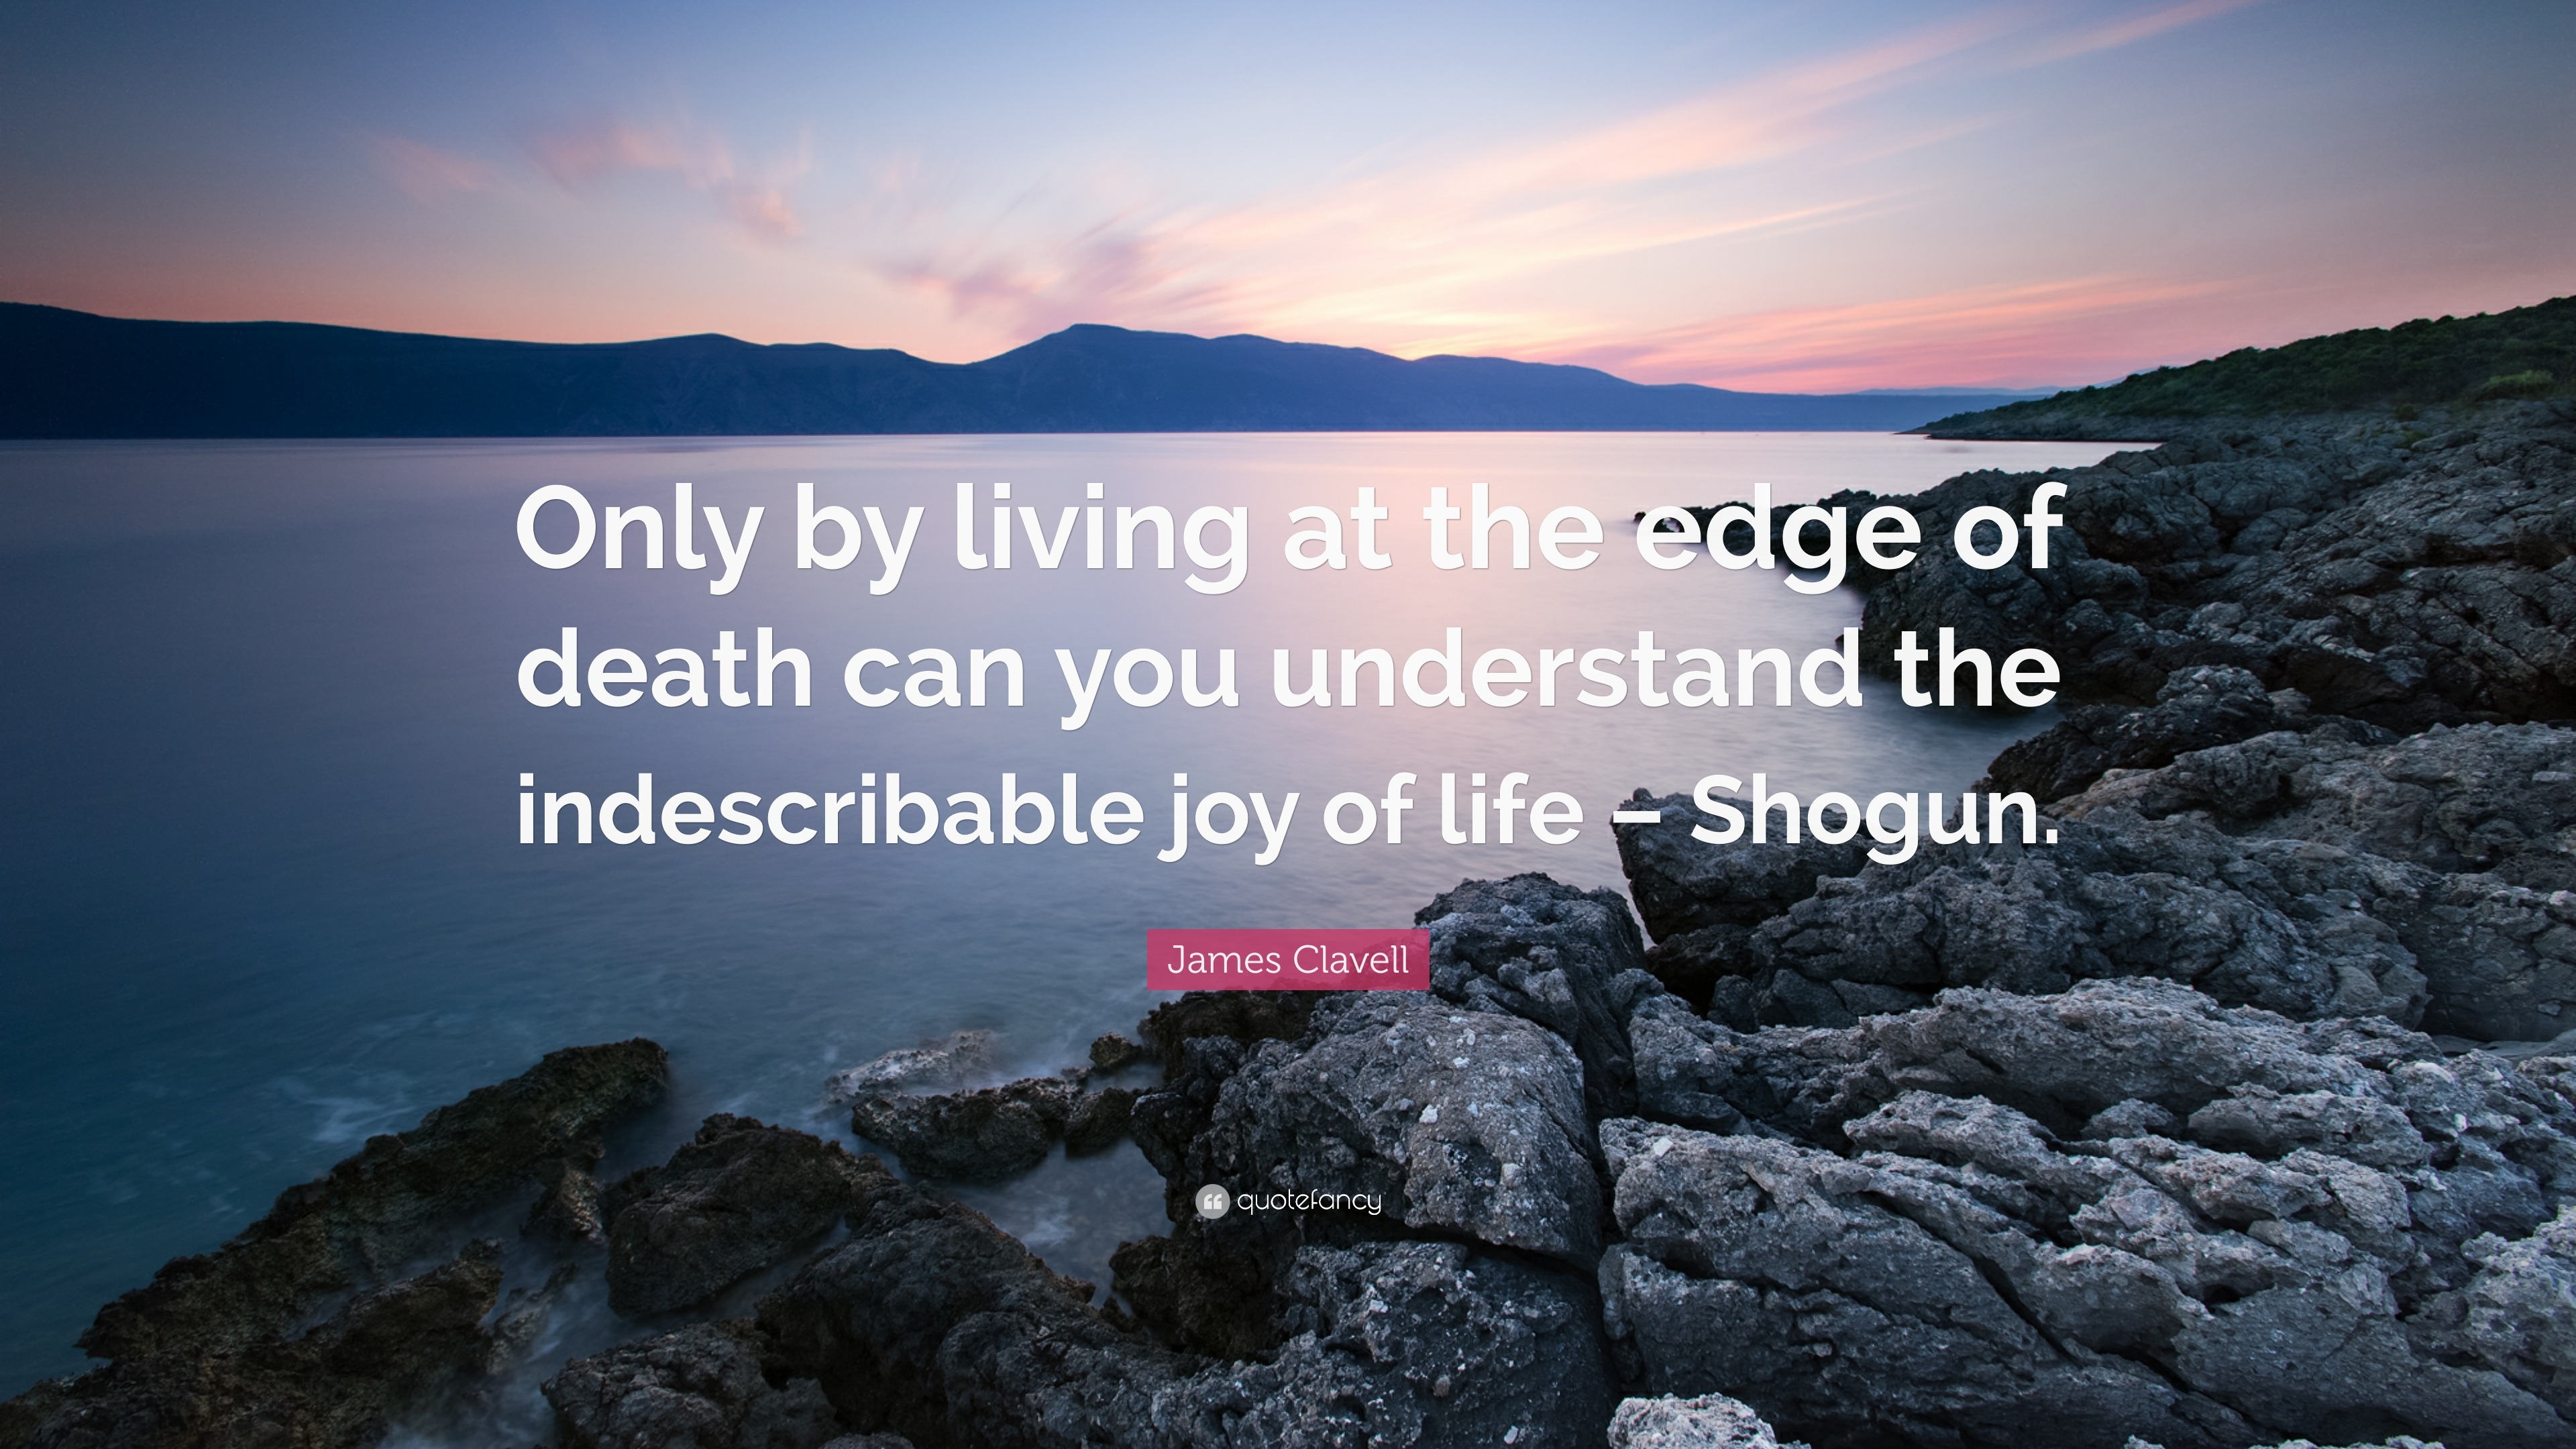 James Clavell Quote Only By Living At The Edge Of Death Can You Understand The Indescribable Joy Of Life Shogun 12 Wallpapers Quotefancy